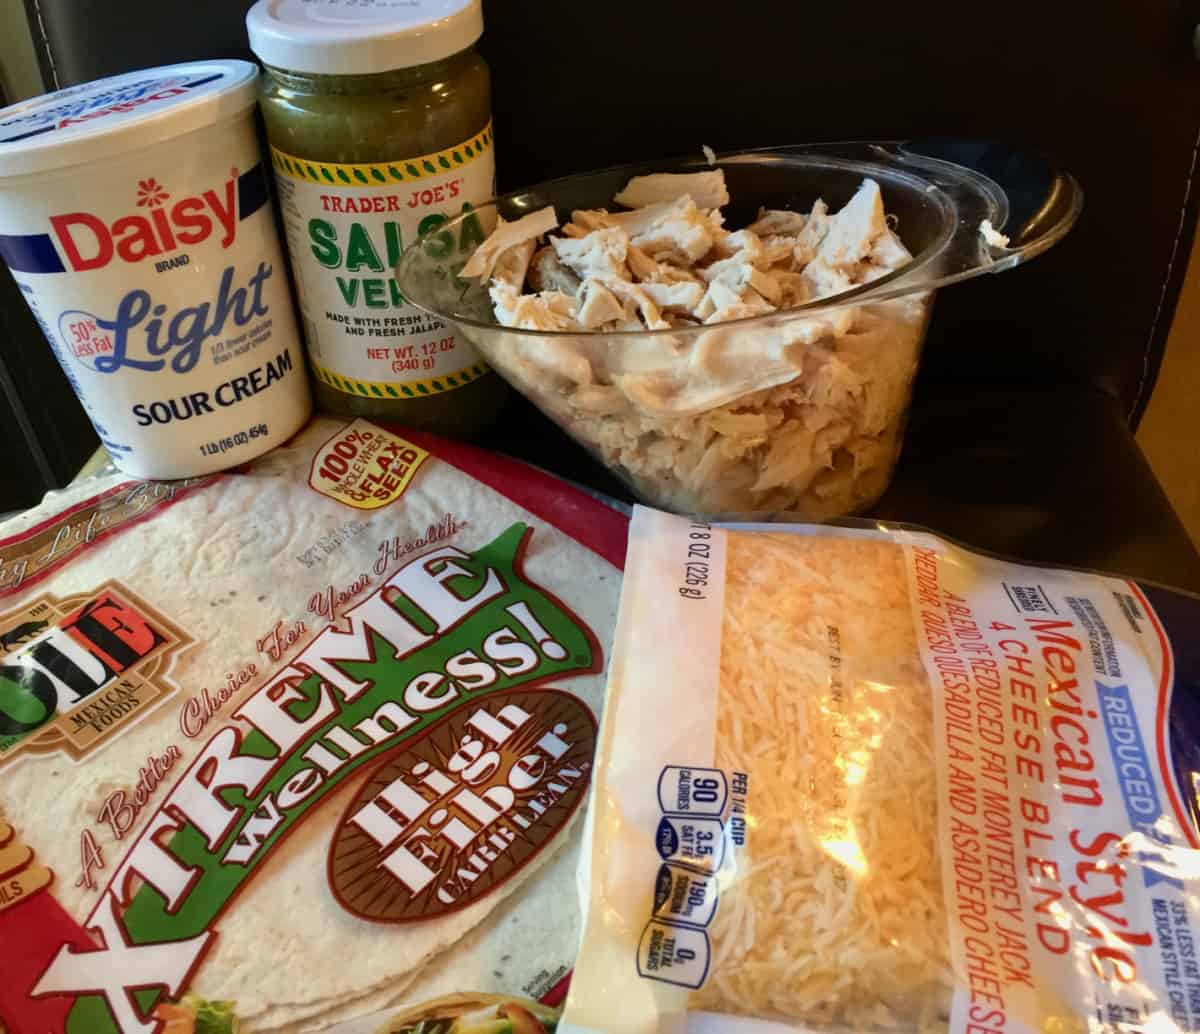 Ingredients for making enchiladas verde including low carb tortillas, cooked chicken, shredded cheese, salsa verde and light sour cream.